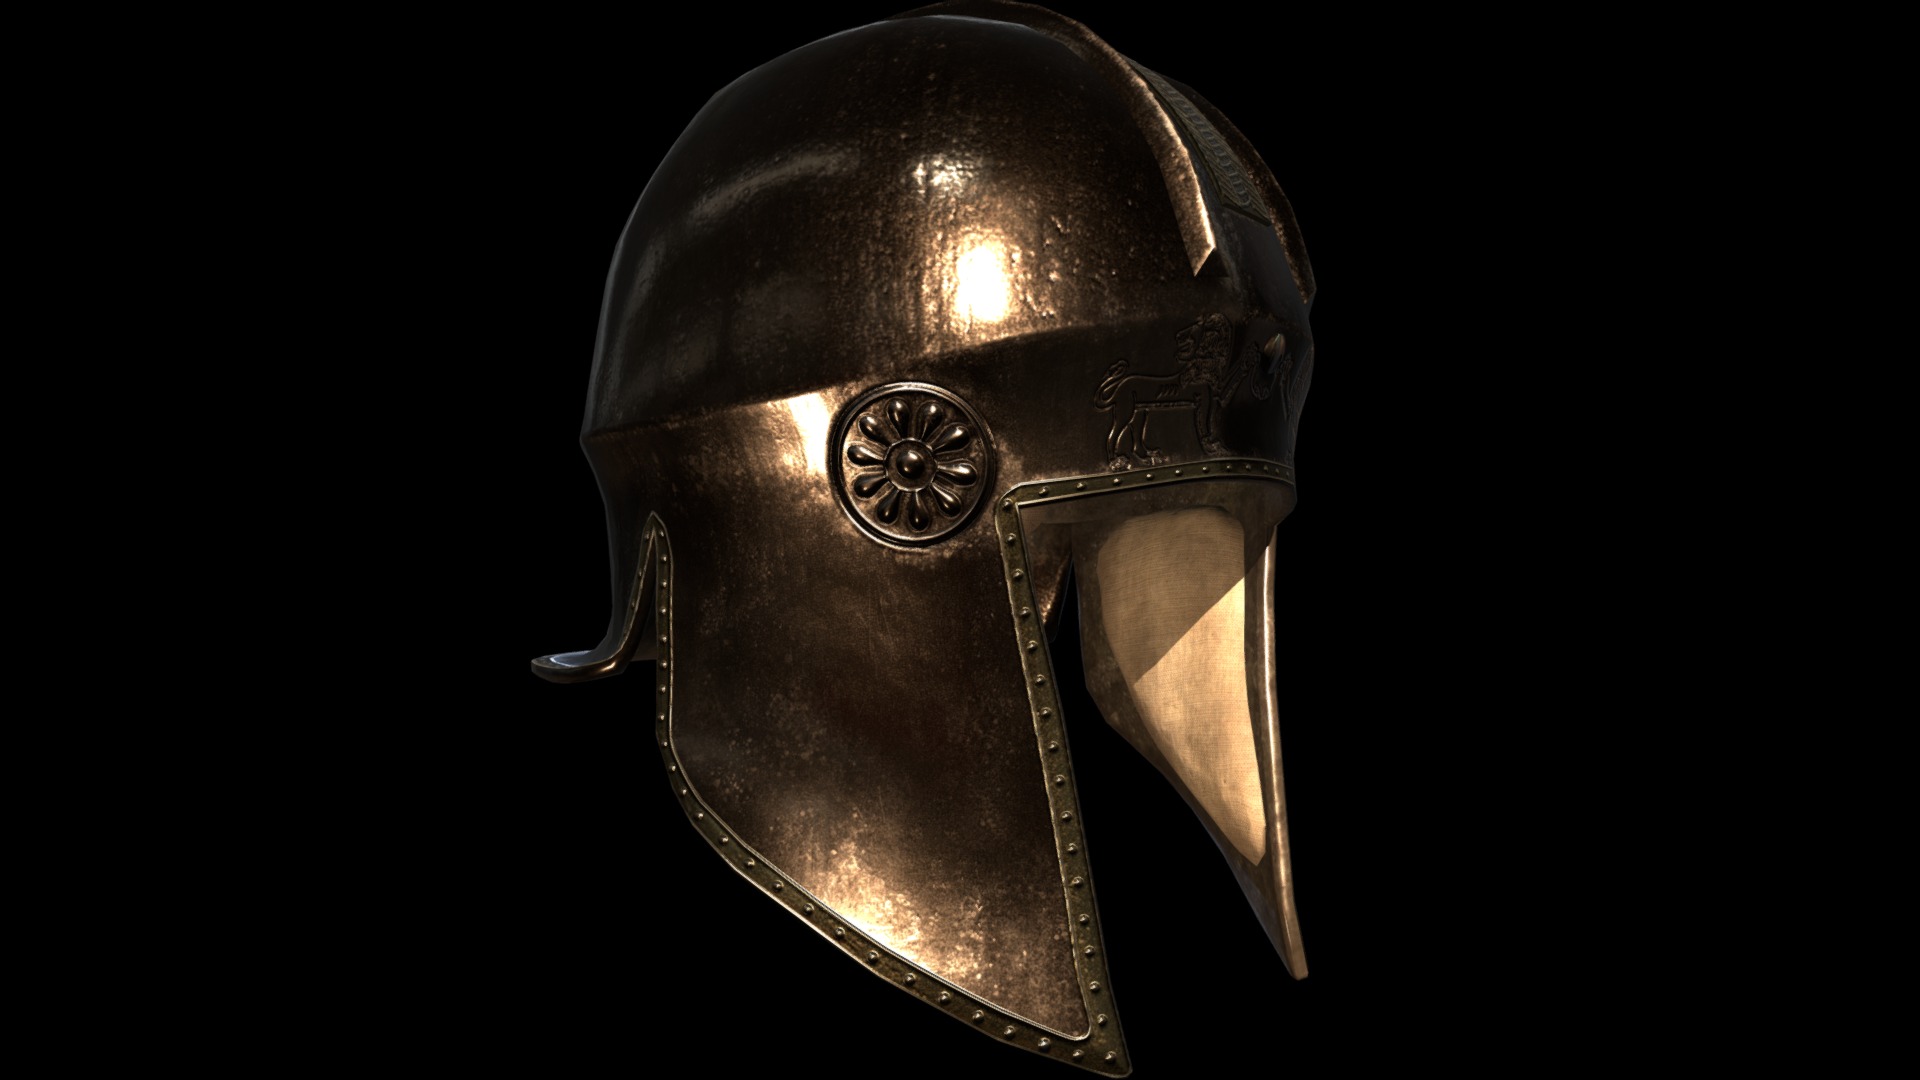 3D model Illyrian Helmet #1 - This is a 3D model of the Illyrian Helmet #1. The 3D model is about a black helmet with a gold handle.